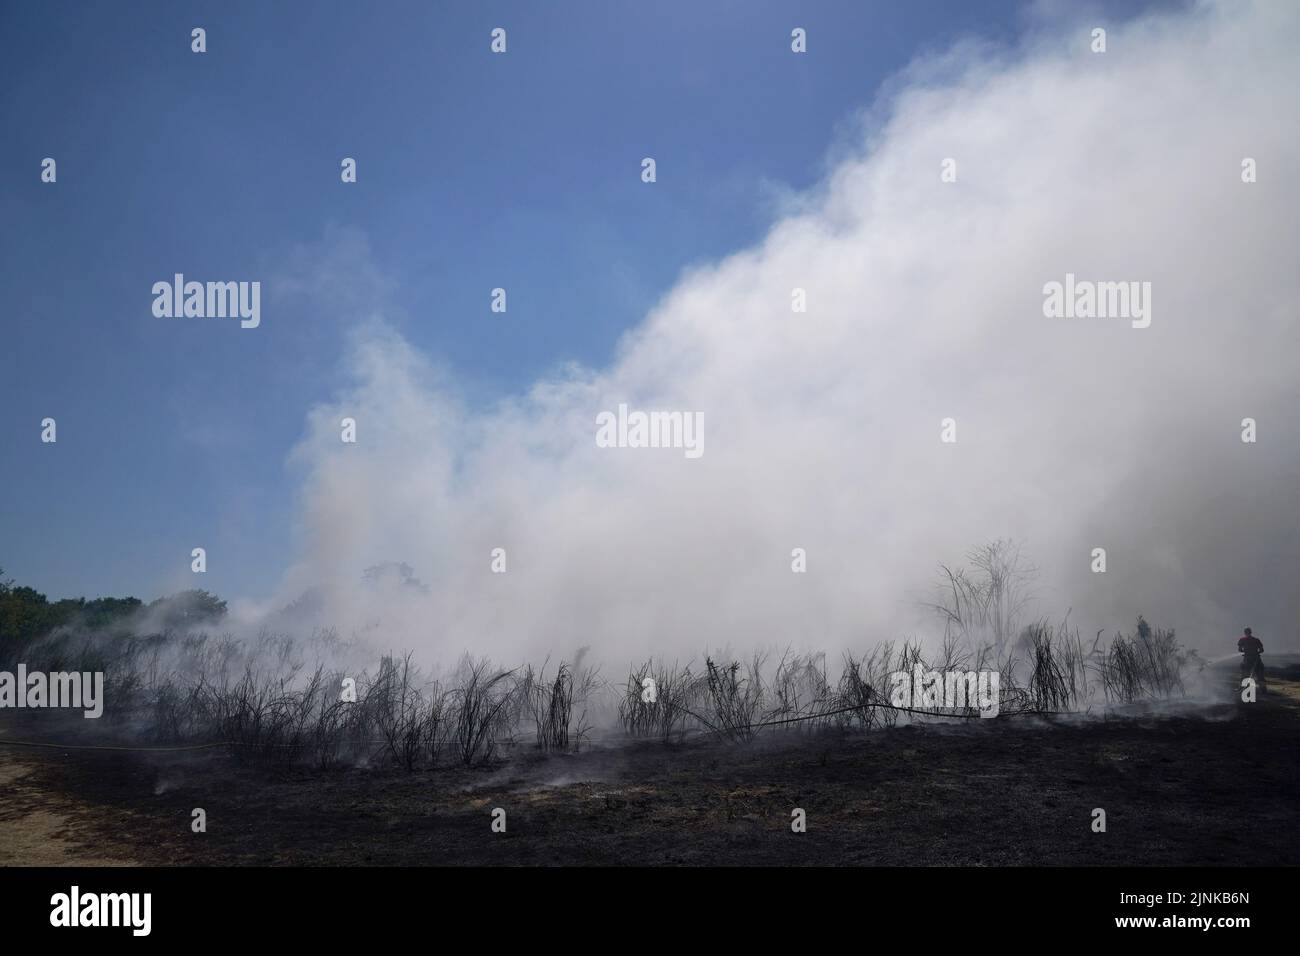 Firefighters battle a grass fire on Leyton flats in east London, as a drought has been declared for parts of England following the driest summer for 50 years. Picture date: Friday August 12, 2022. Stock Photo